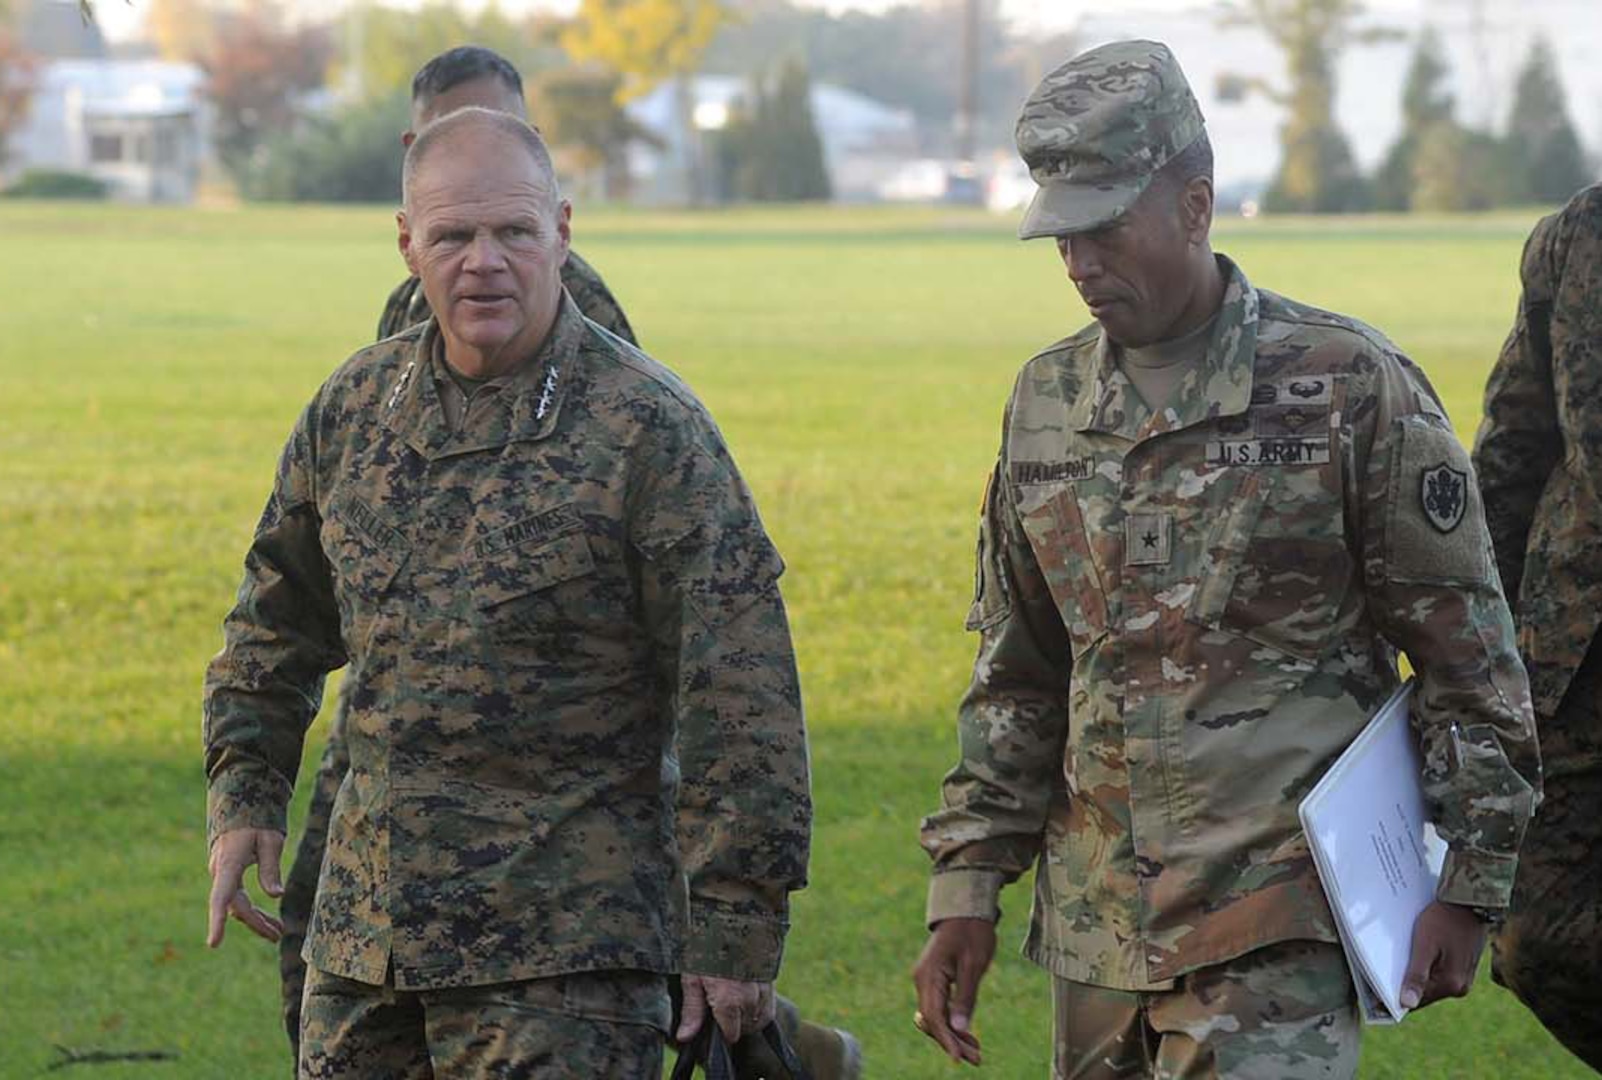 Army Brig. Gen. Charles Hamilton, DLA Troop Support commander (right), greets Gen. Robert B. Neller, commandant of the Marine Corps, as he arrives for a visit to DLA Troop Support in Philadelphia Nov. 2